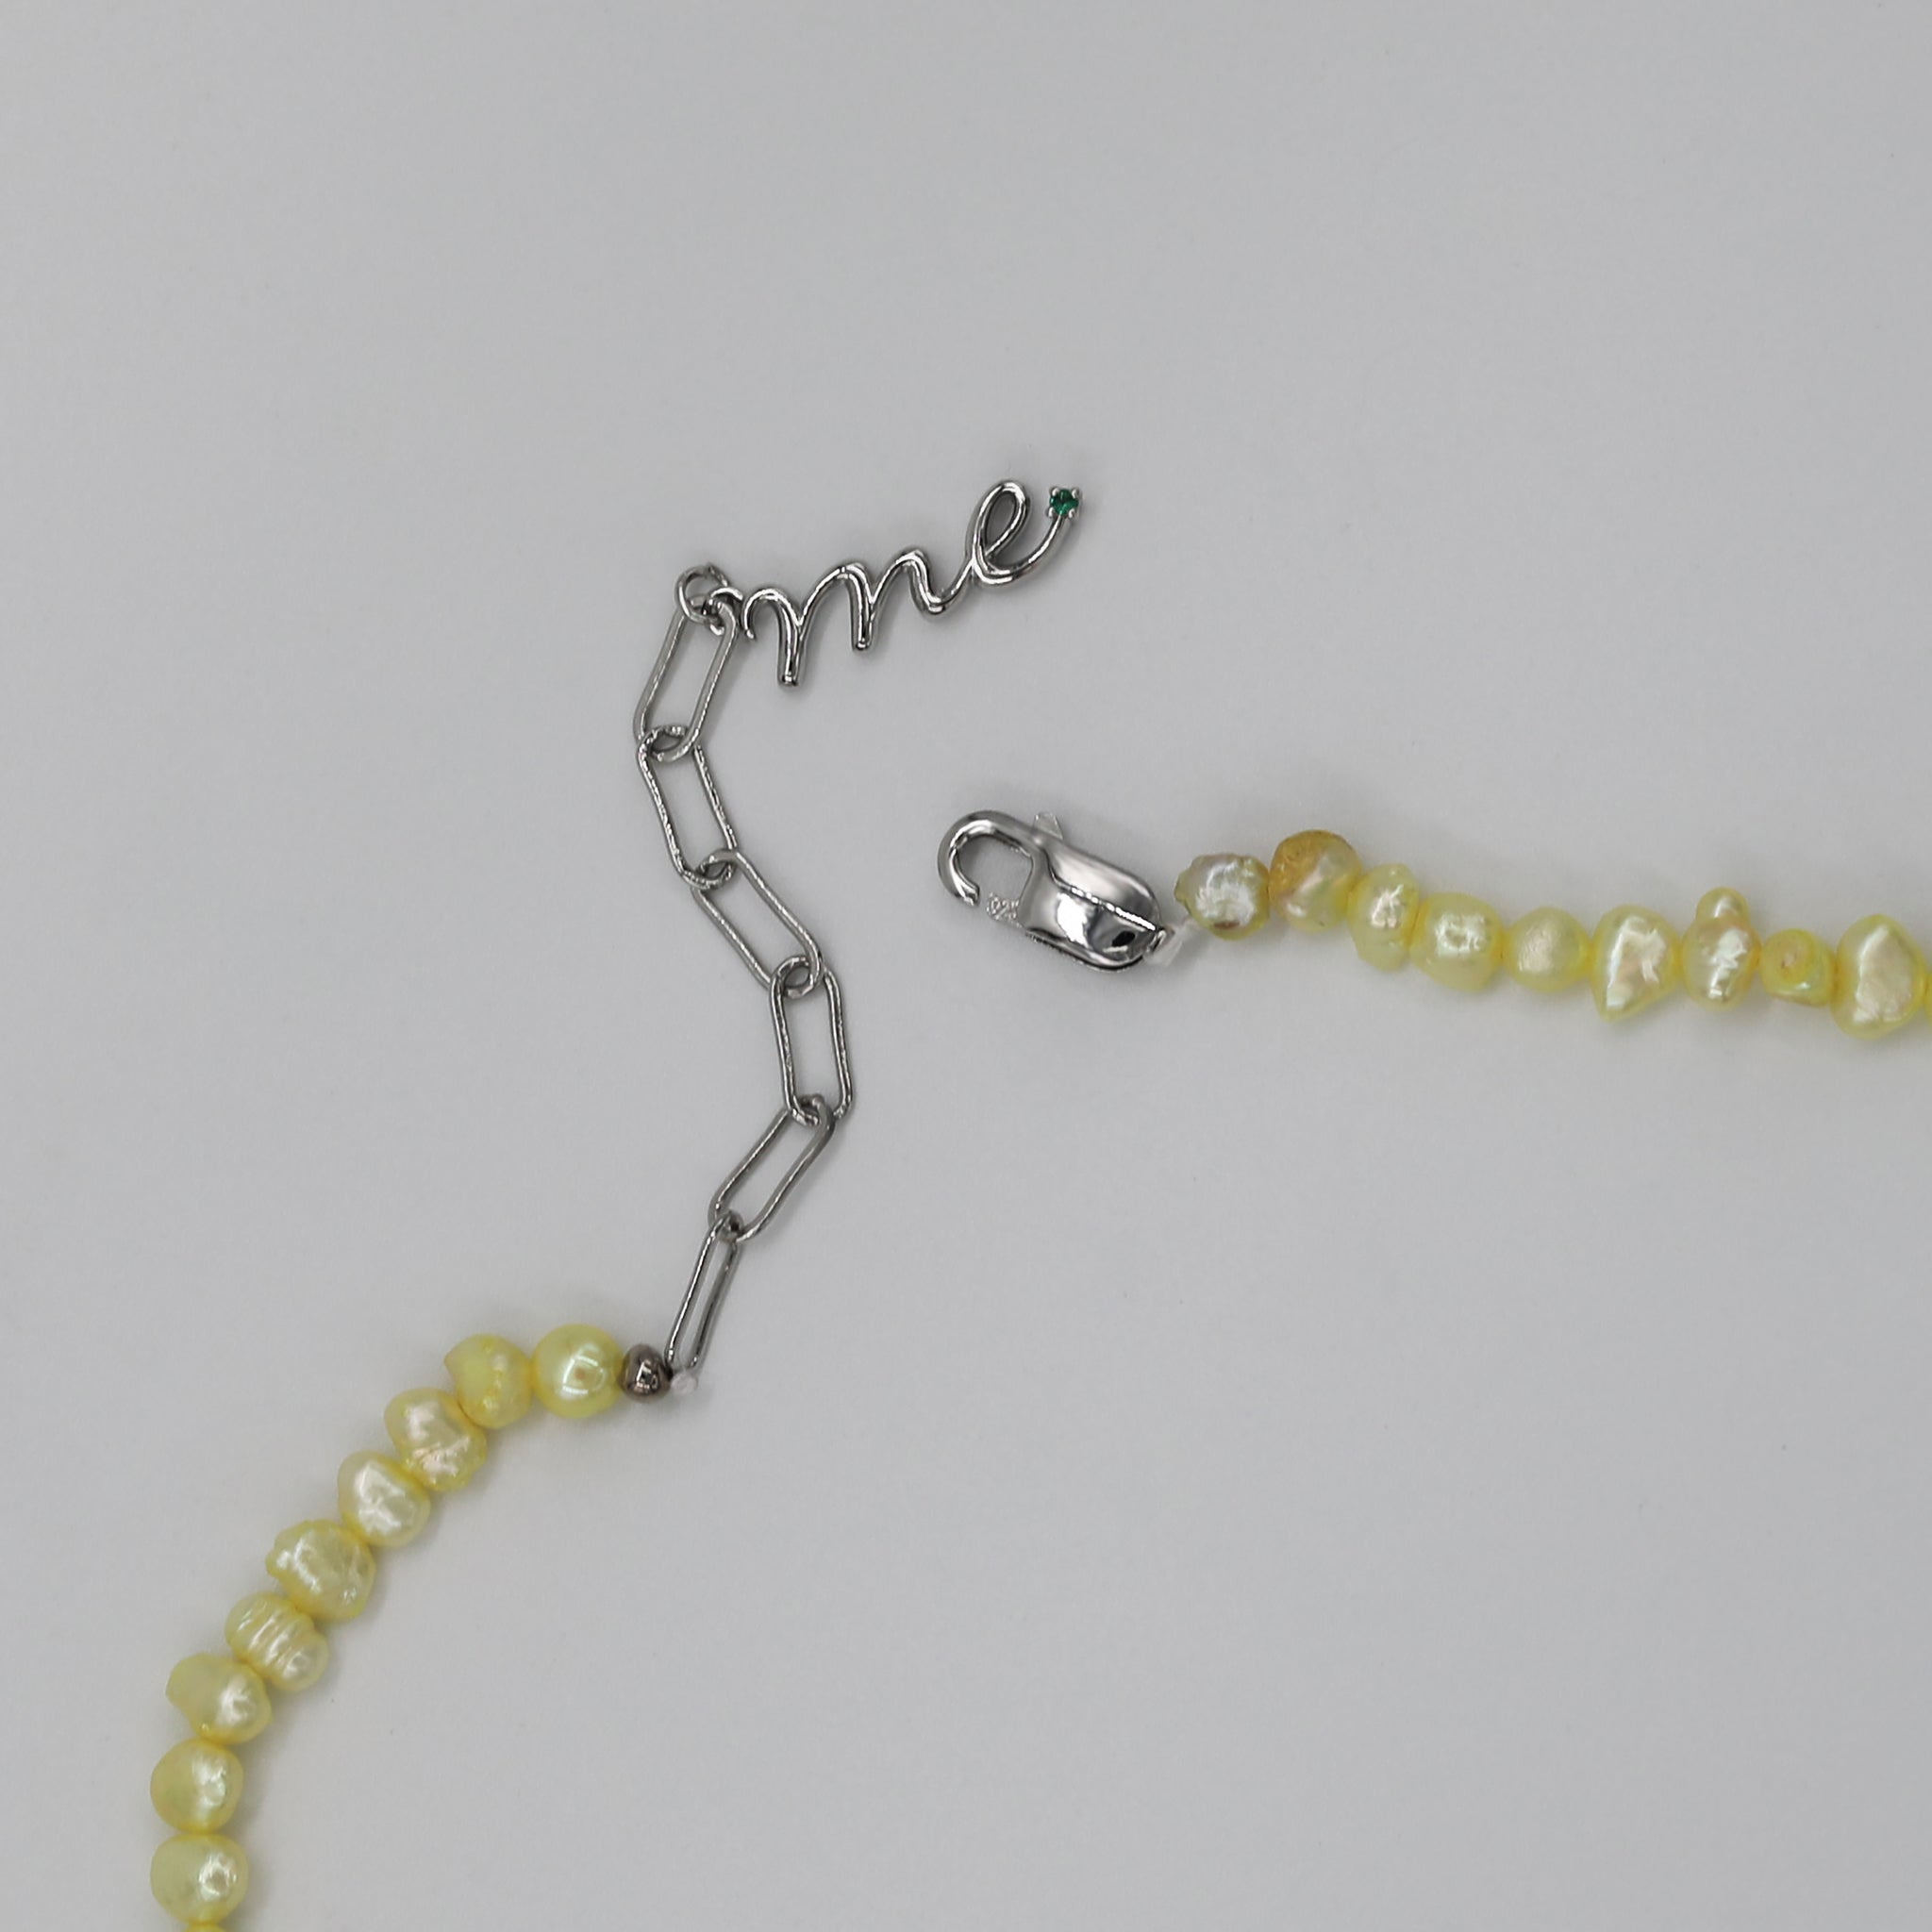 Yellow Pearly Necklace